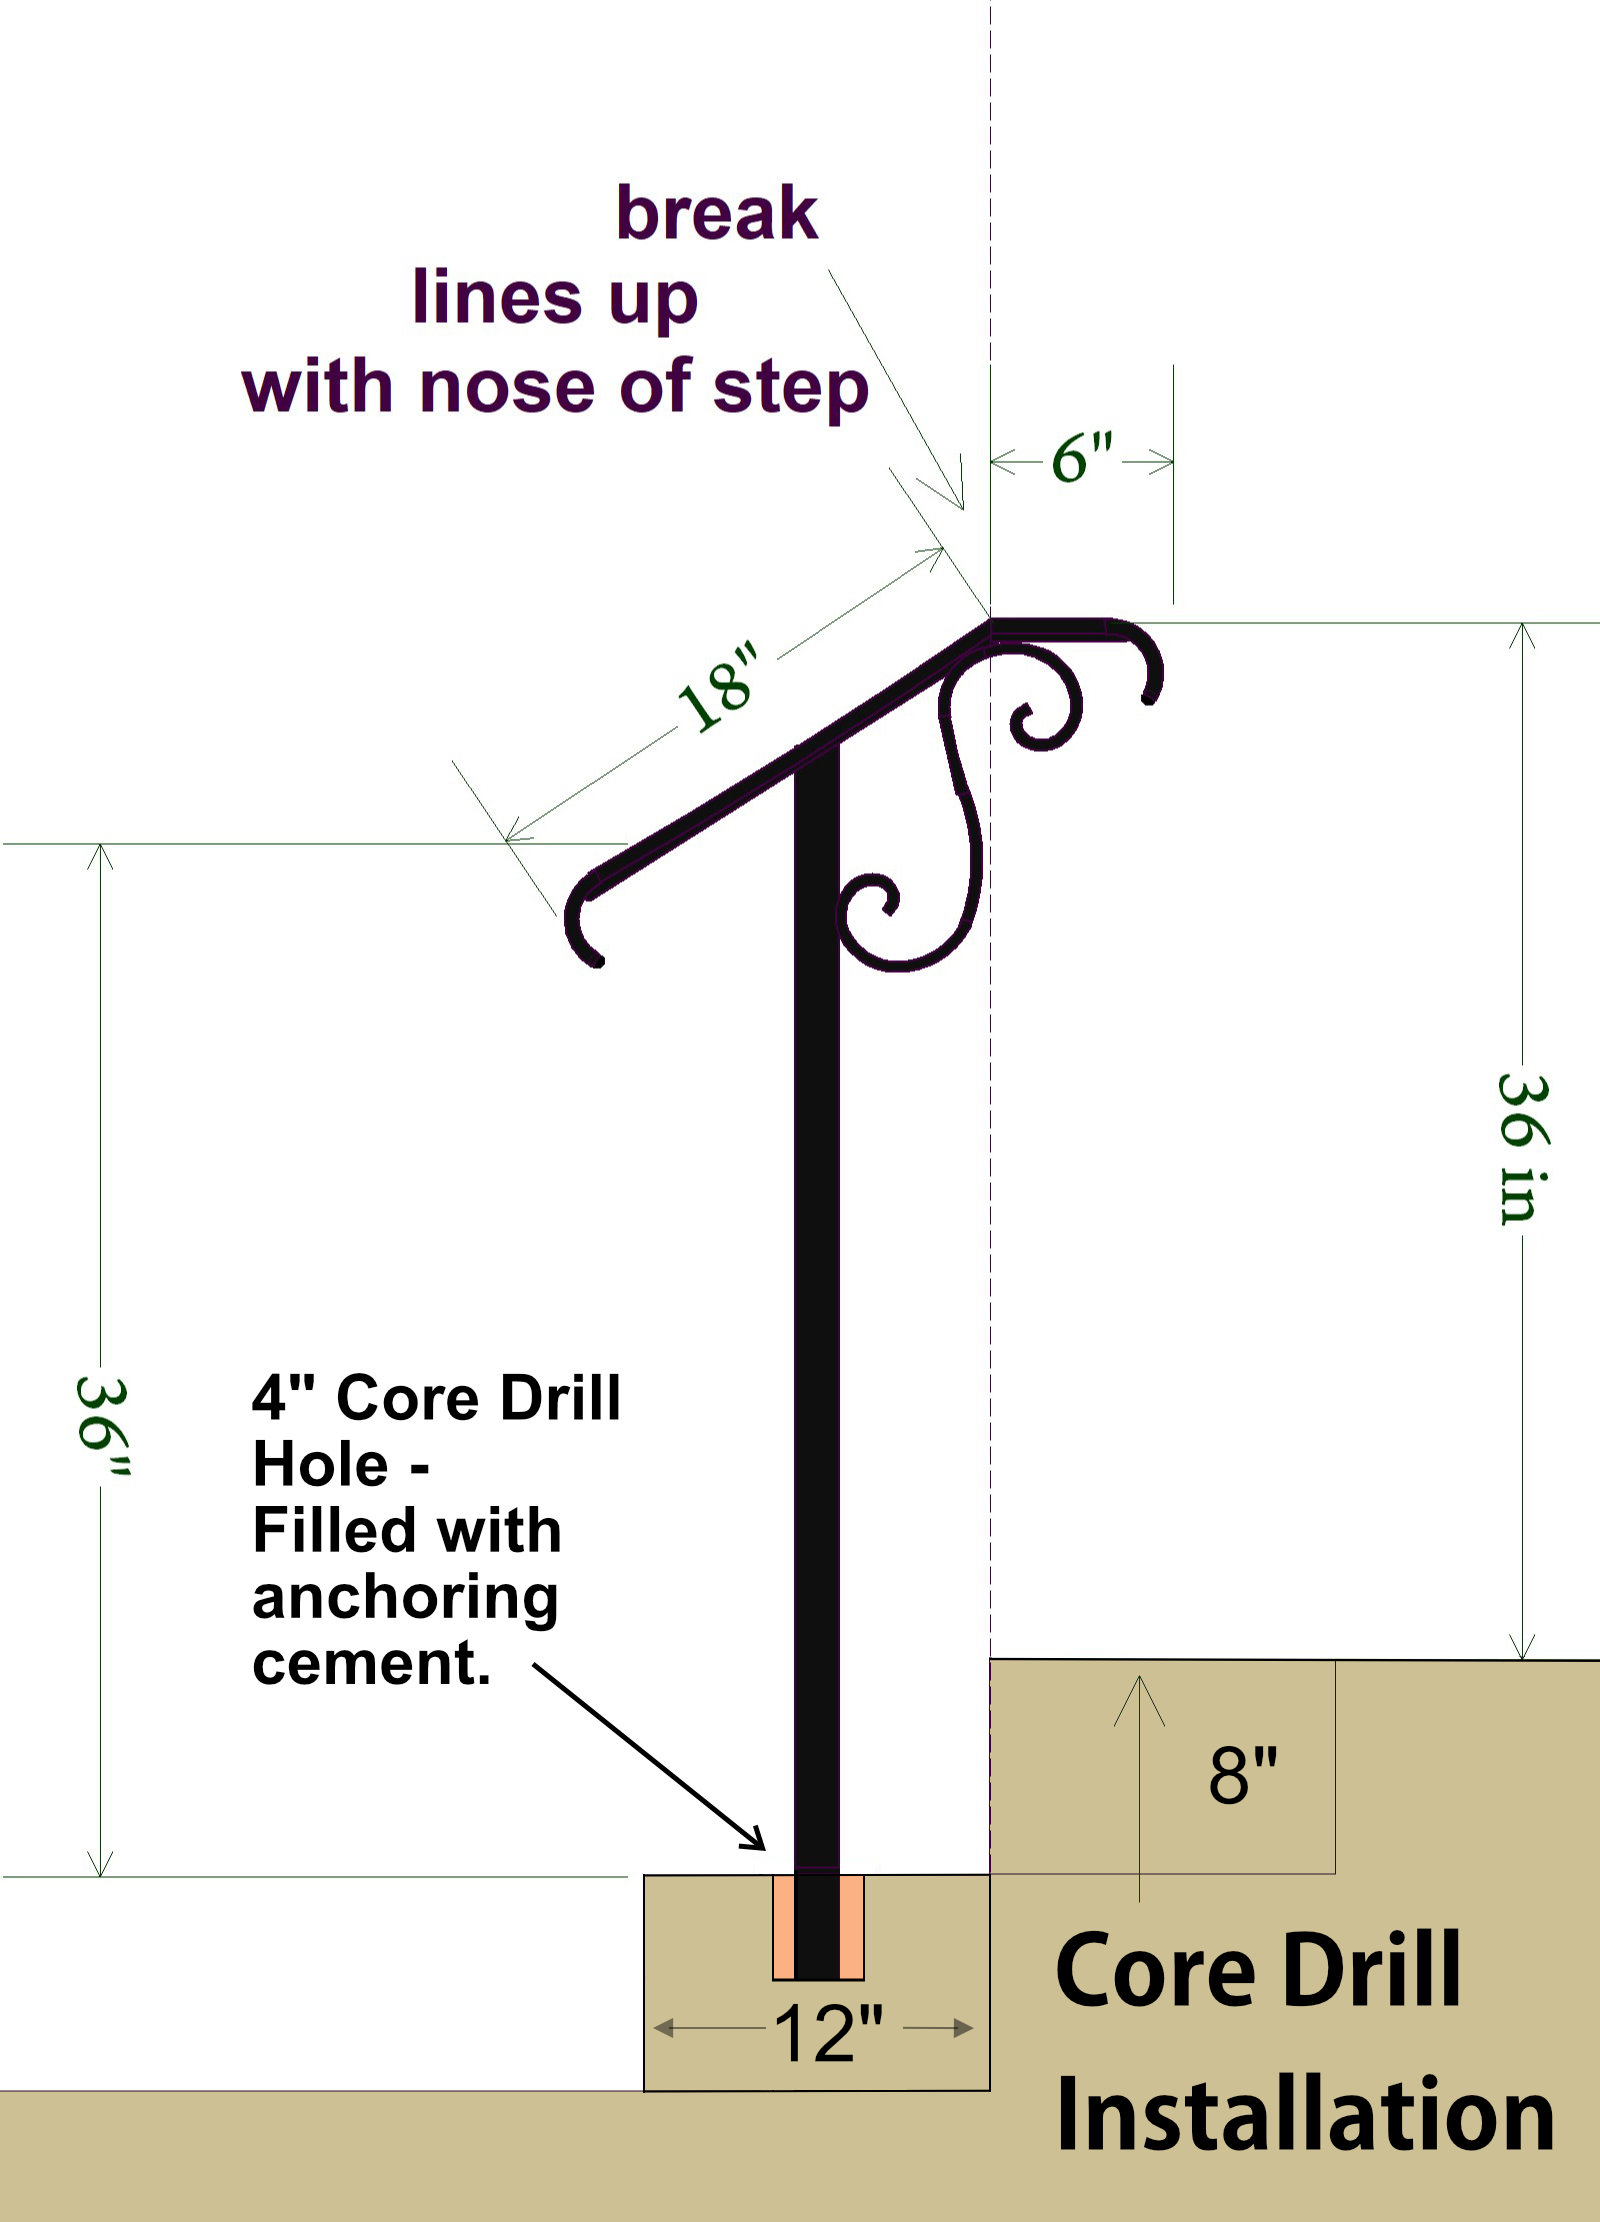 TEchnical drawing showing the core drill method of installing a one post hand rail. 4 inch diamter hole in concrete or stone step 10 inches deep.